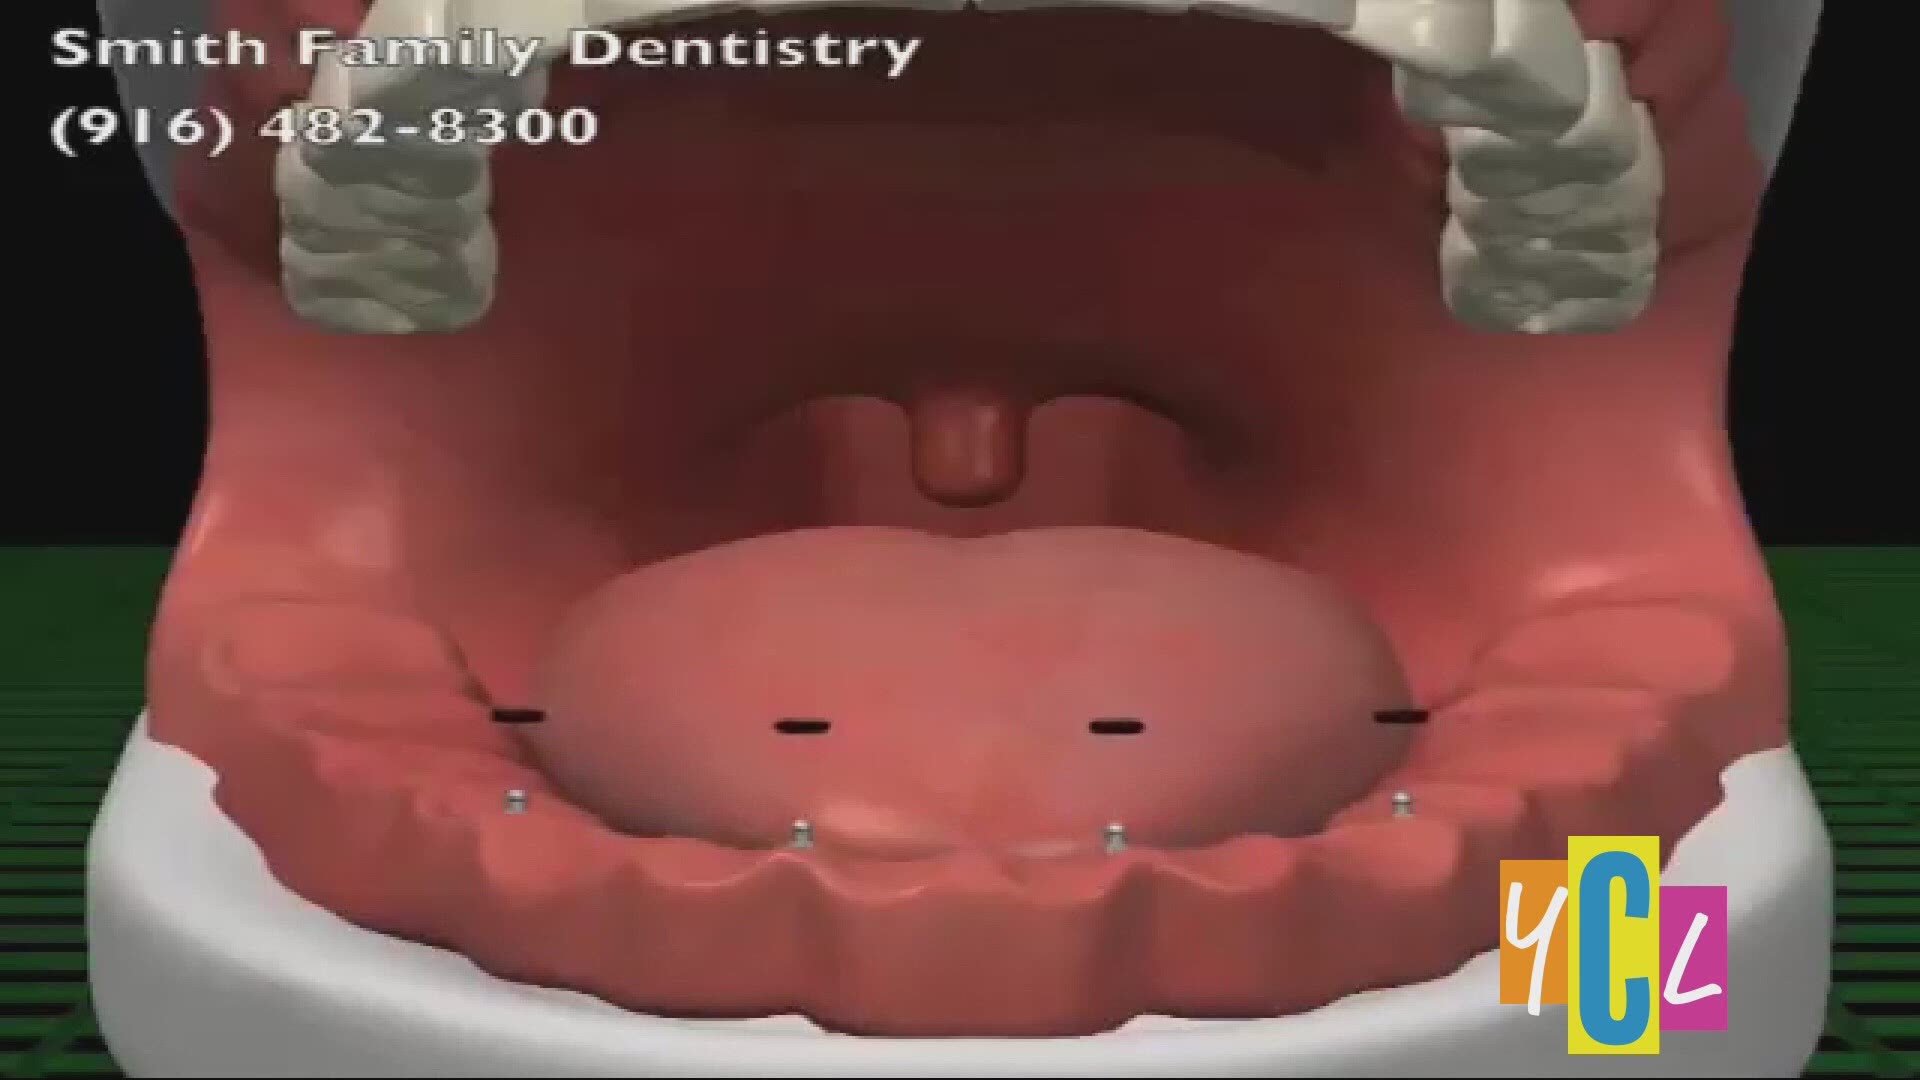 Dr. Andrea Joy Smith tells us about the many benefits included with mini dental implants. This segment was paid for by Dr. Andrea Joy Smith.